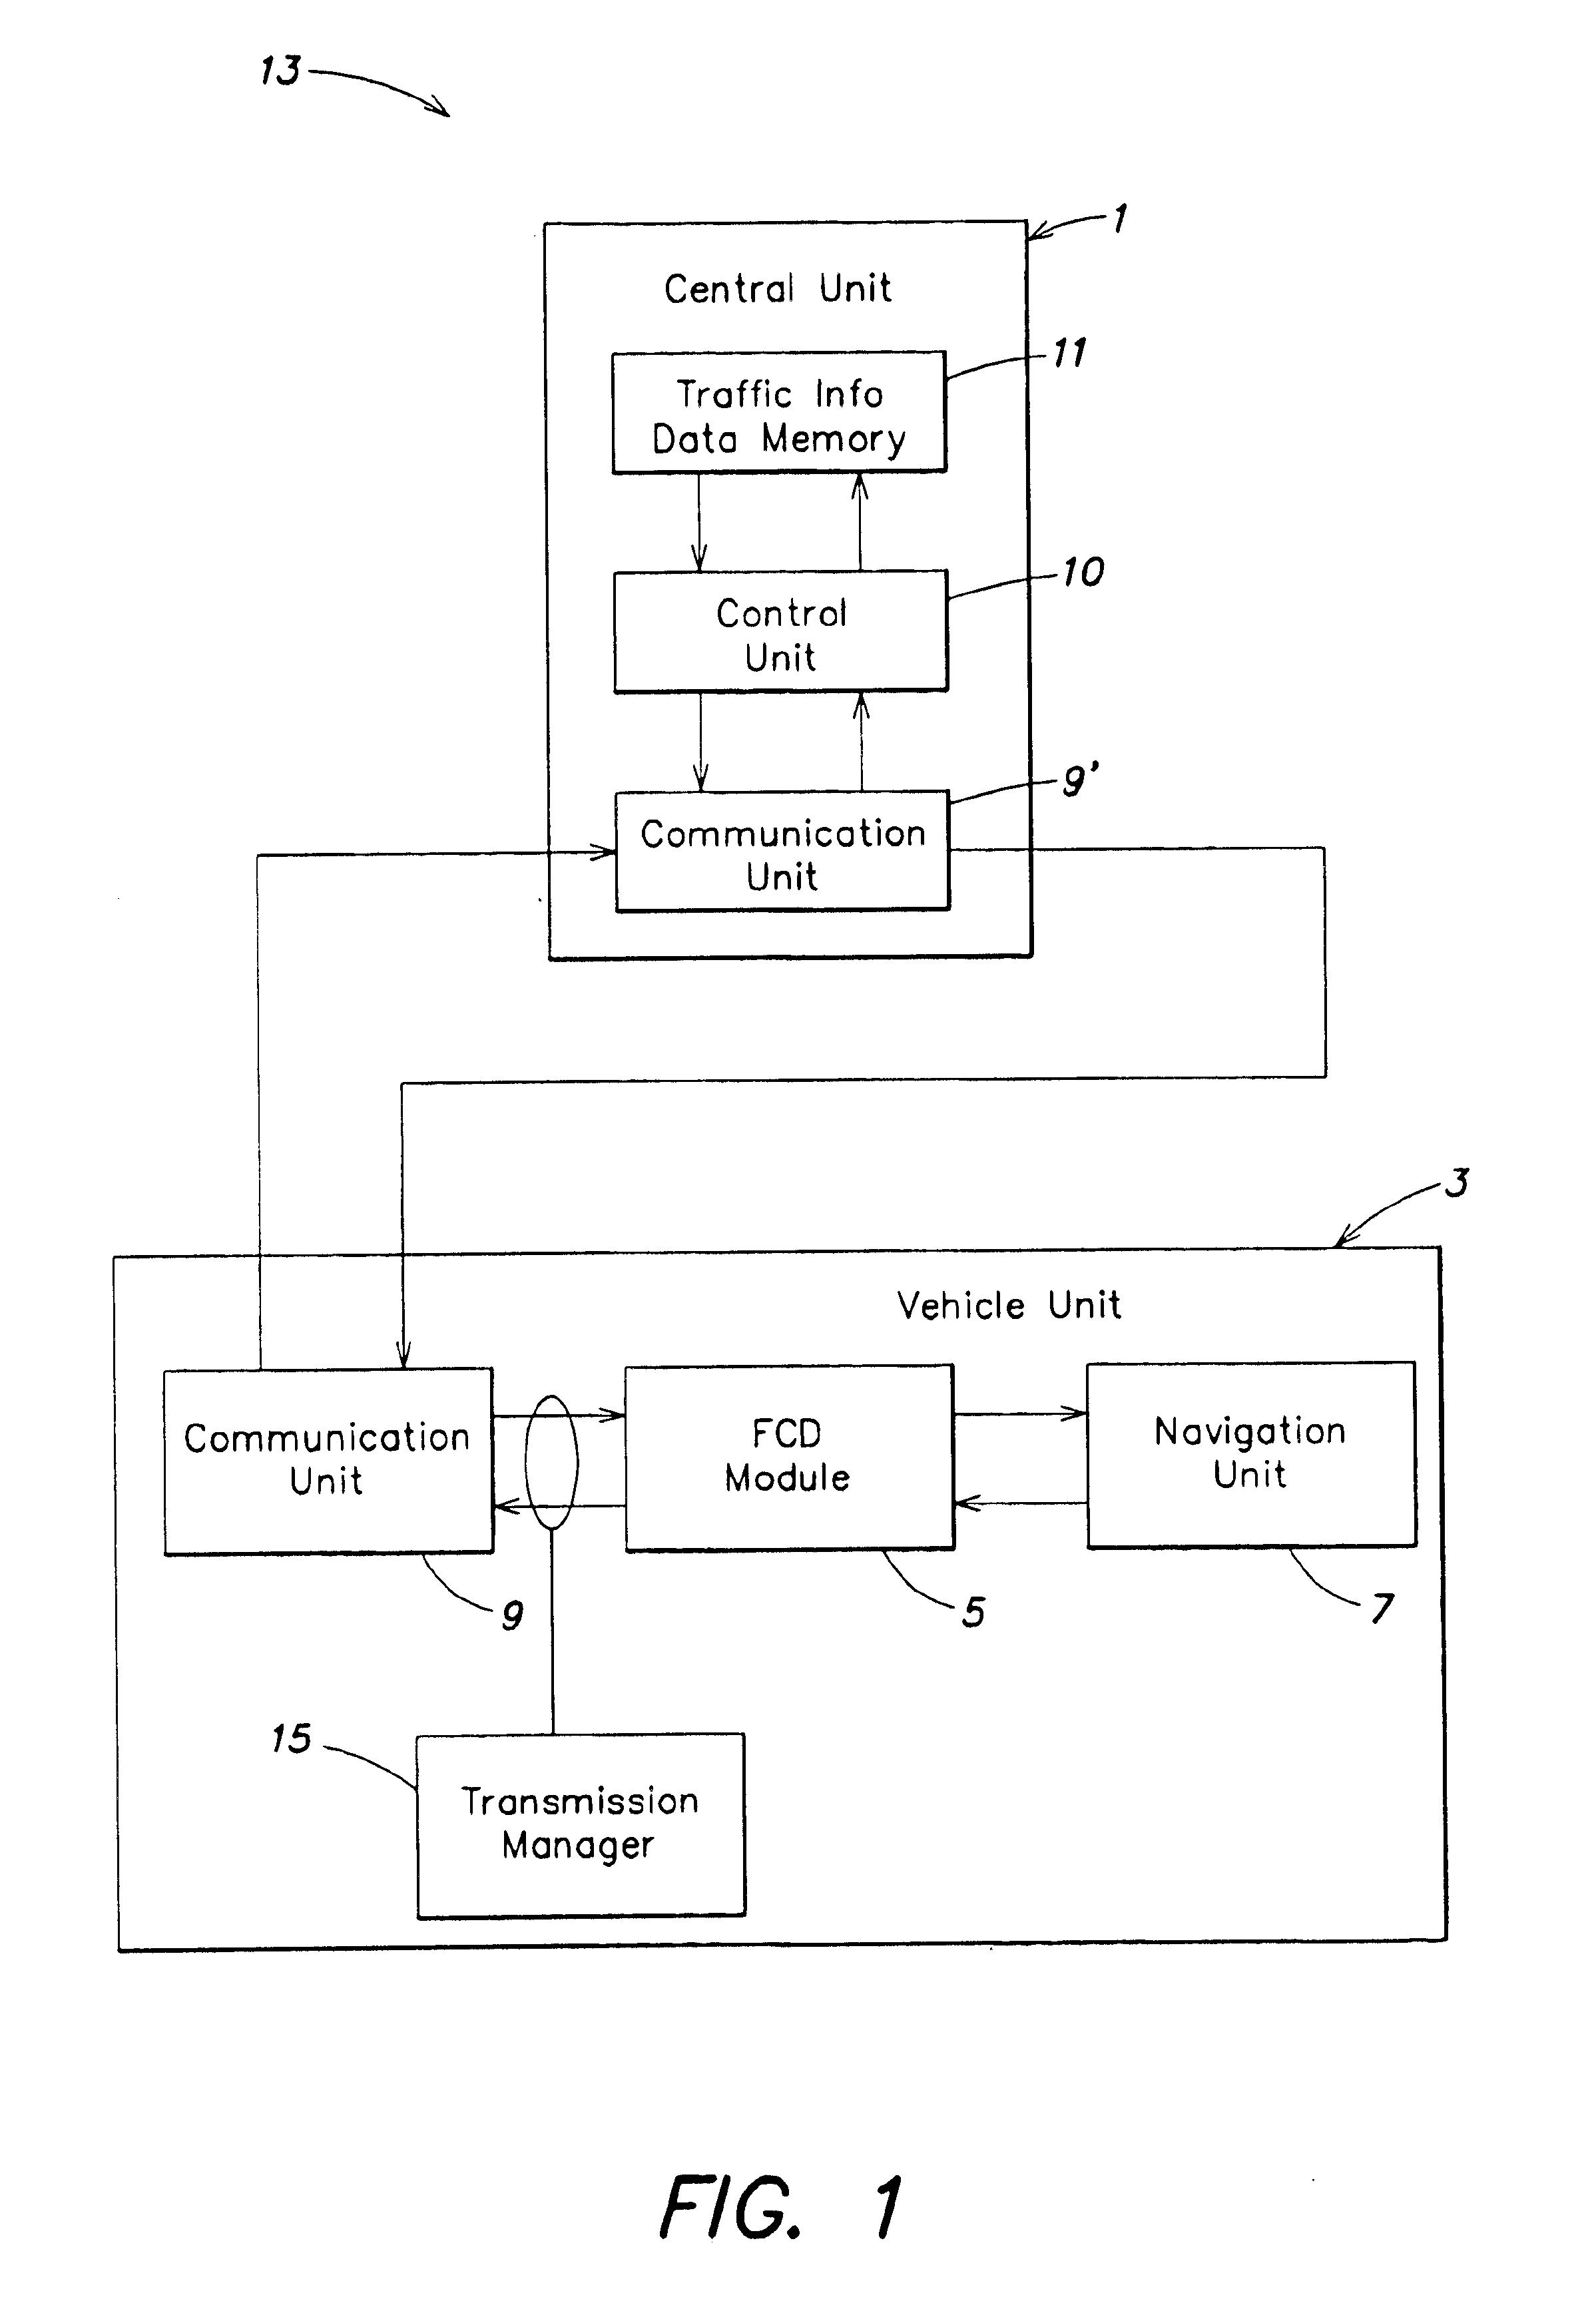 Motor vehicle navigation system that receives route information from a central unit